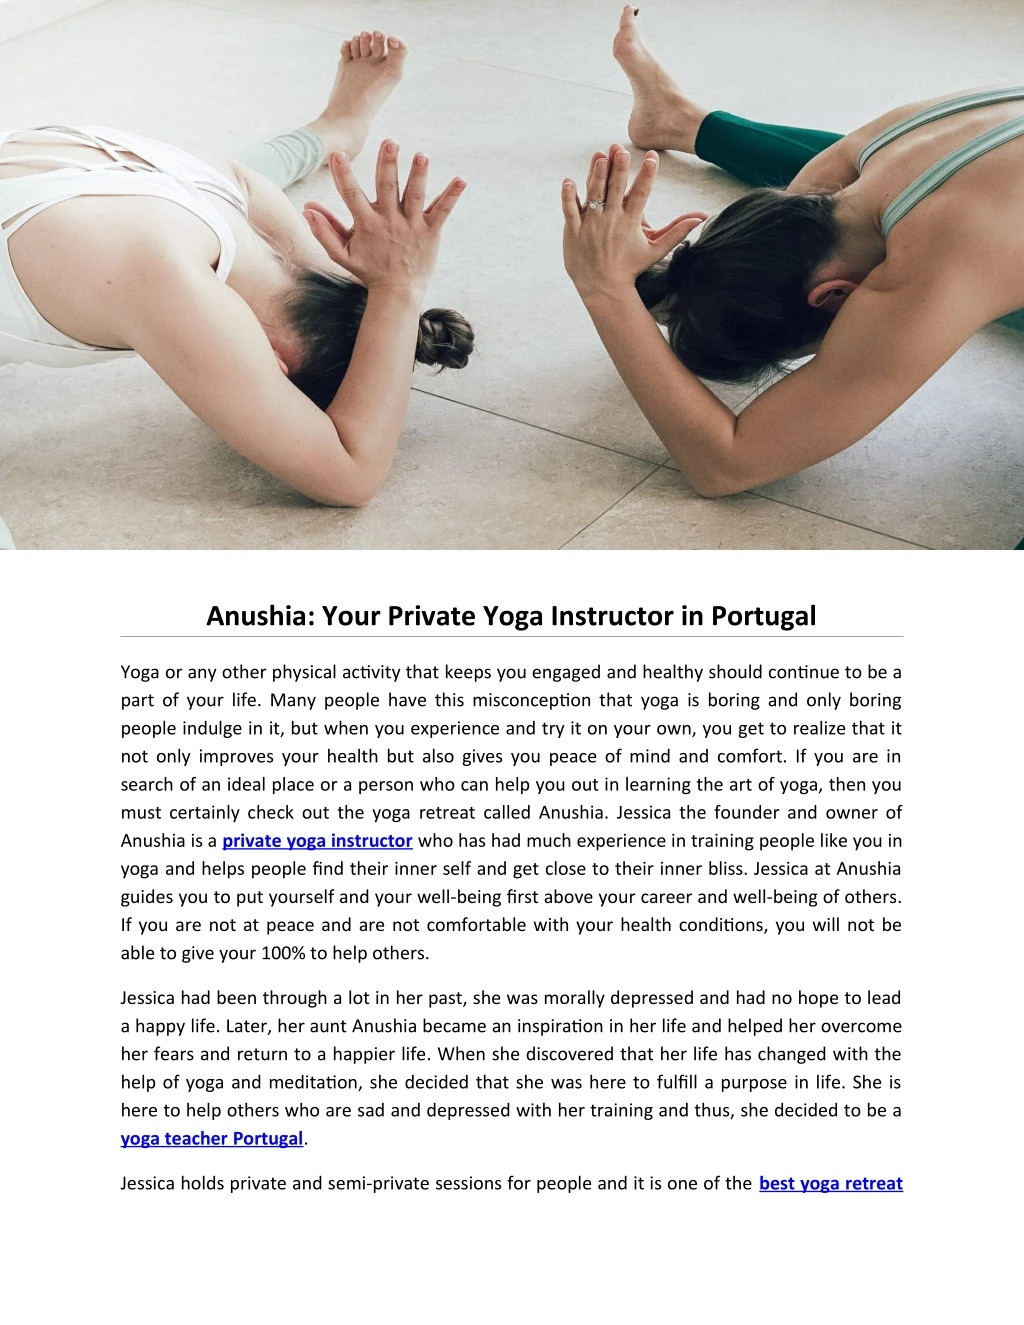 anushia your private yoga instructor in portugal